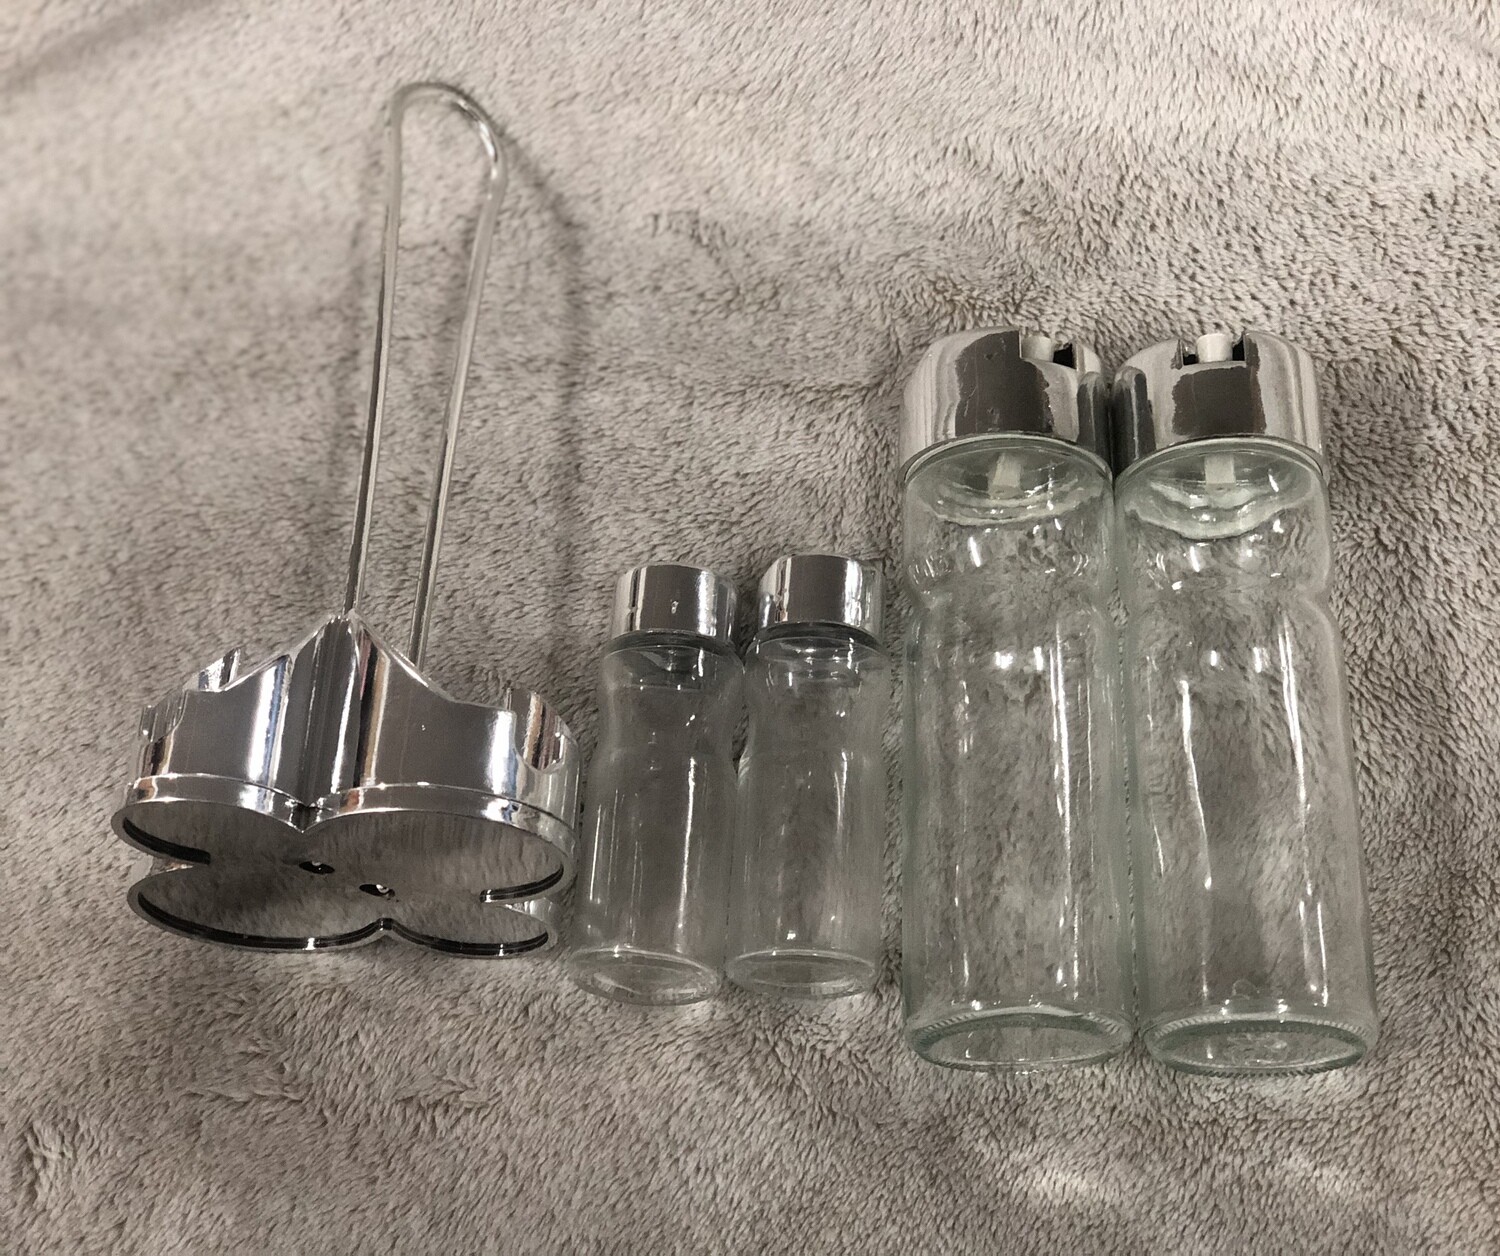 Sauces spices jars set glass on plastic holder silver coated